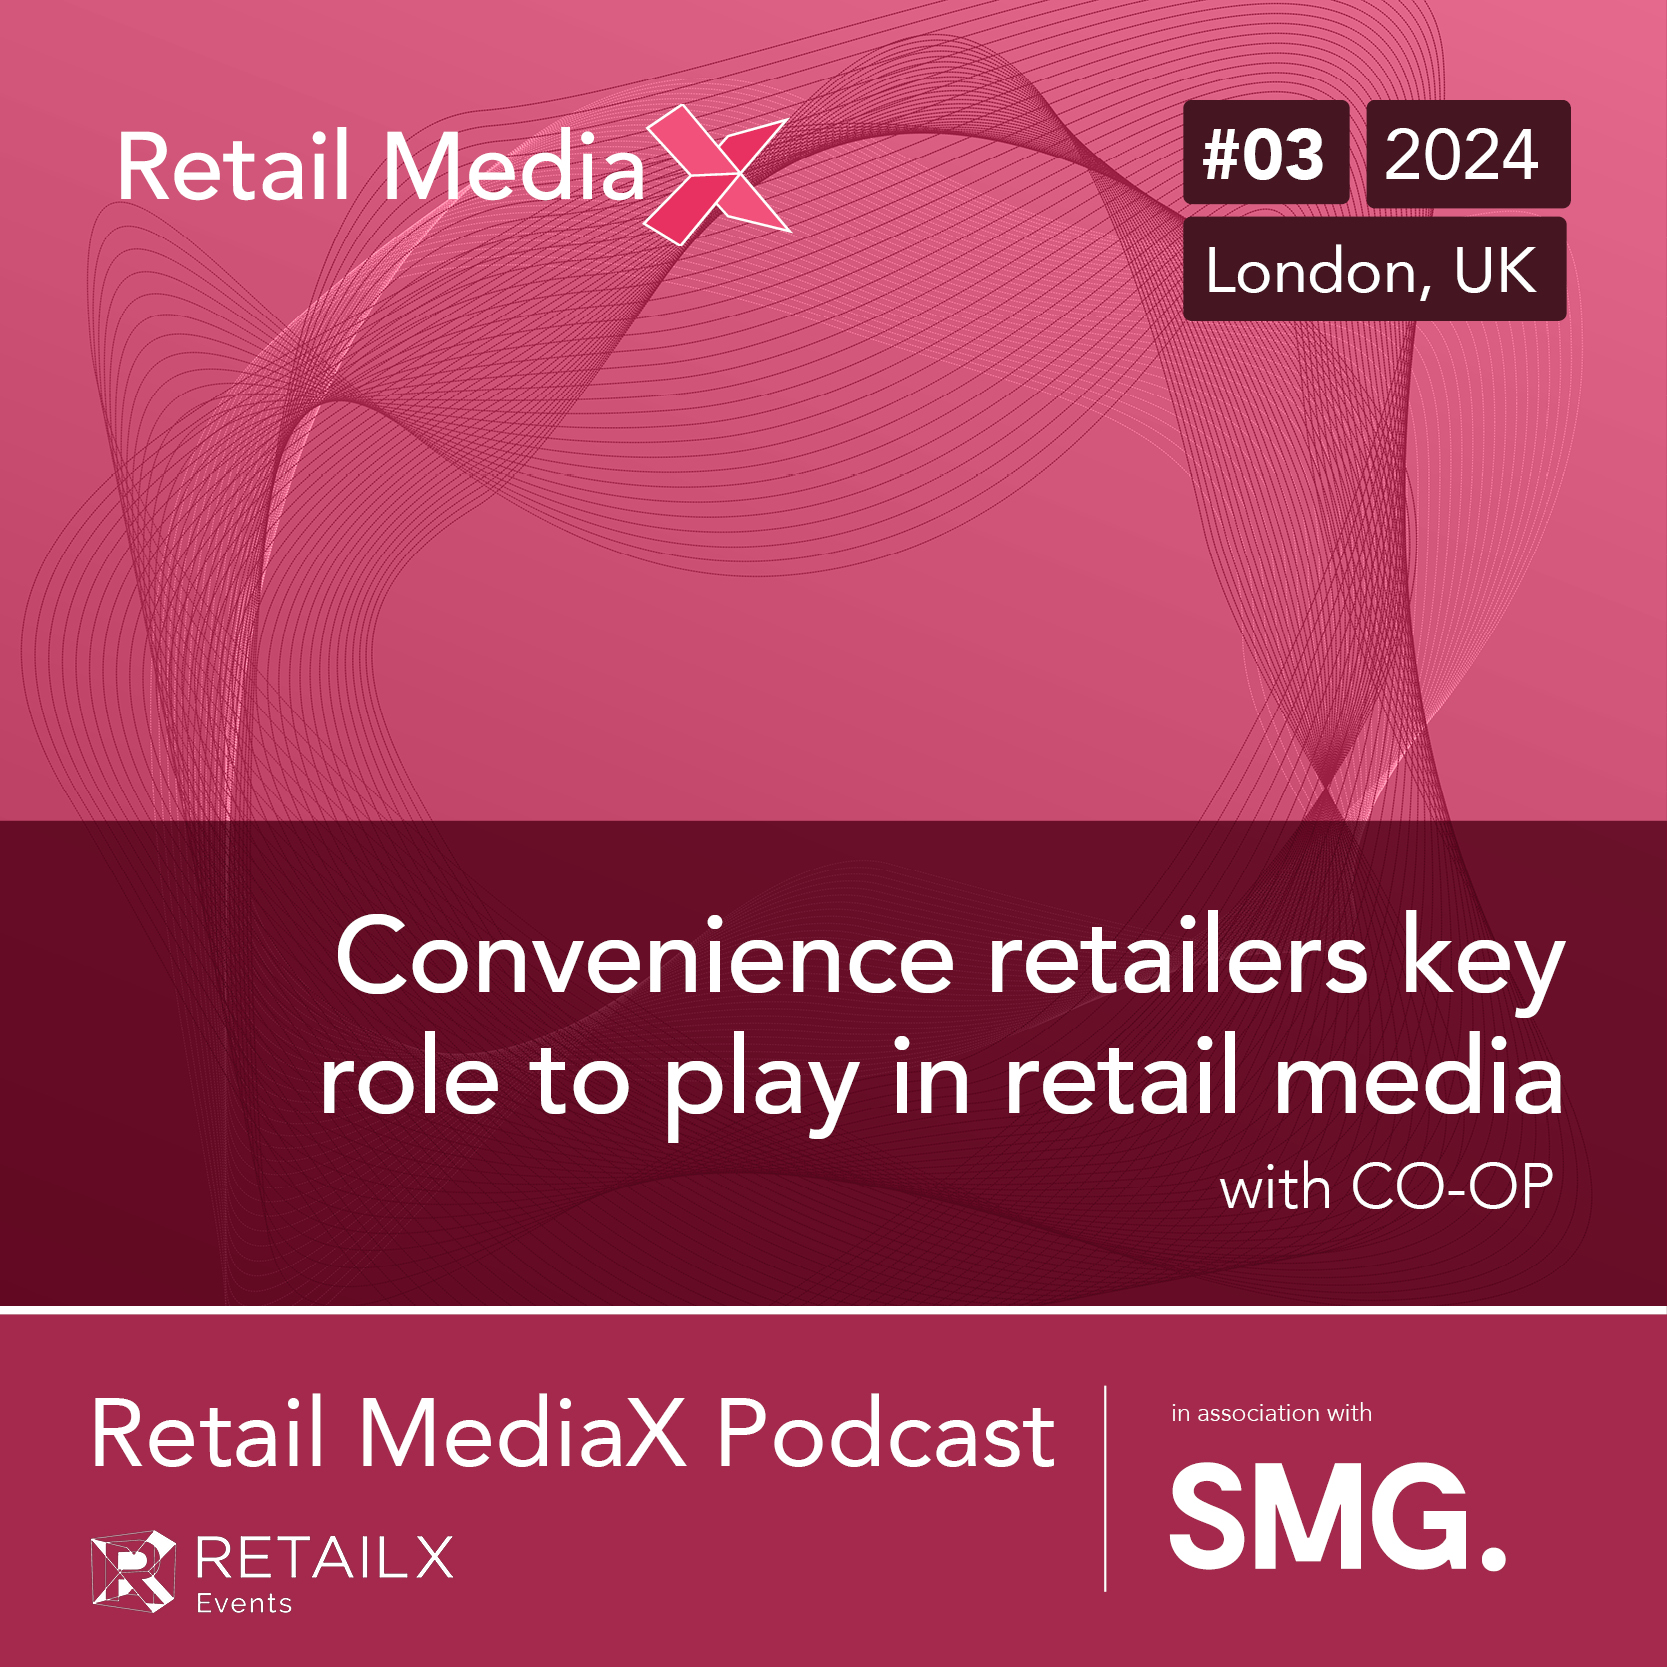 Retail MediaX Podcast - Co-op